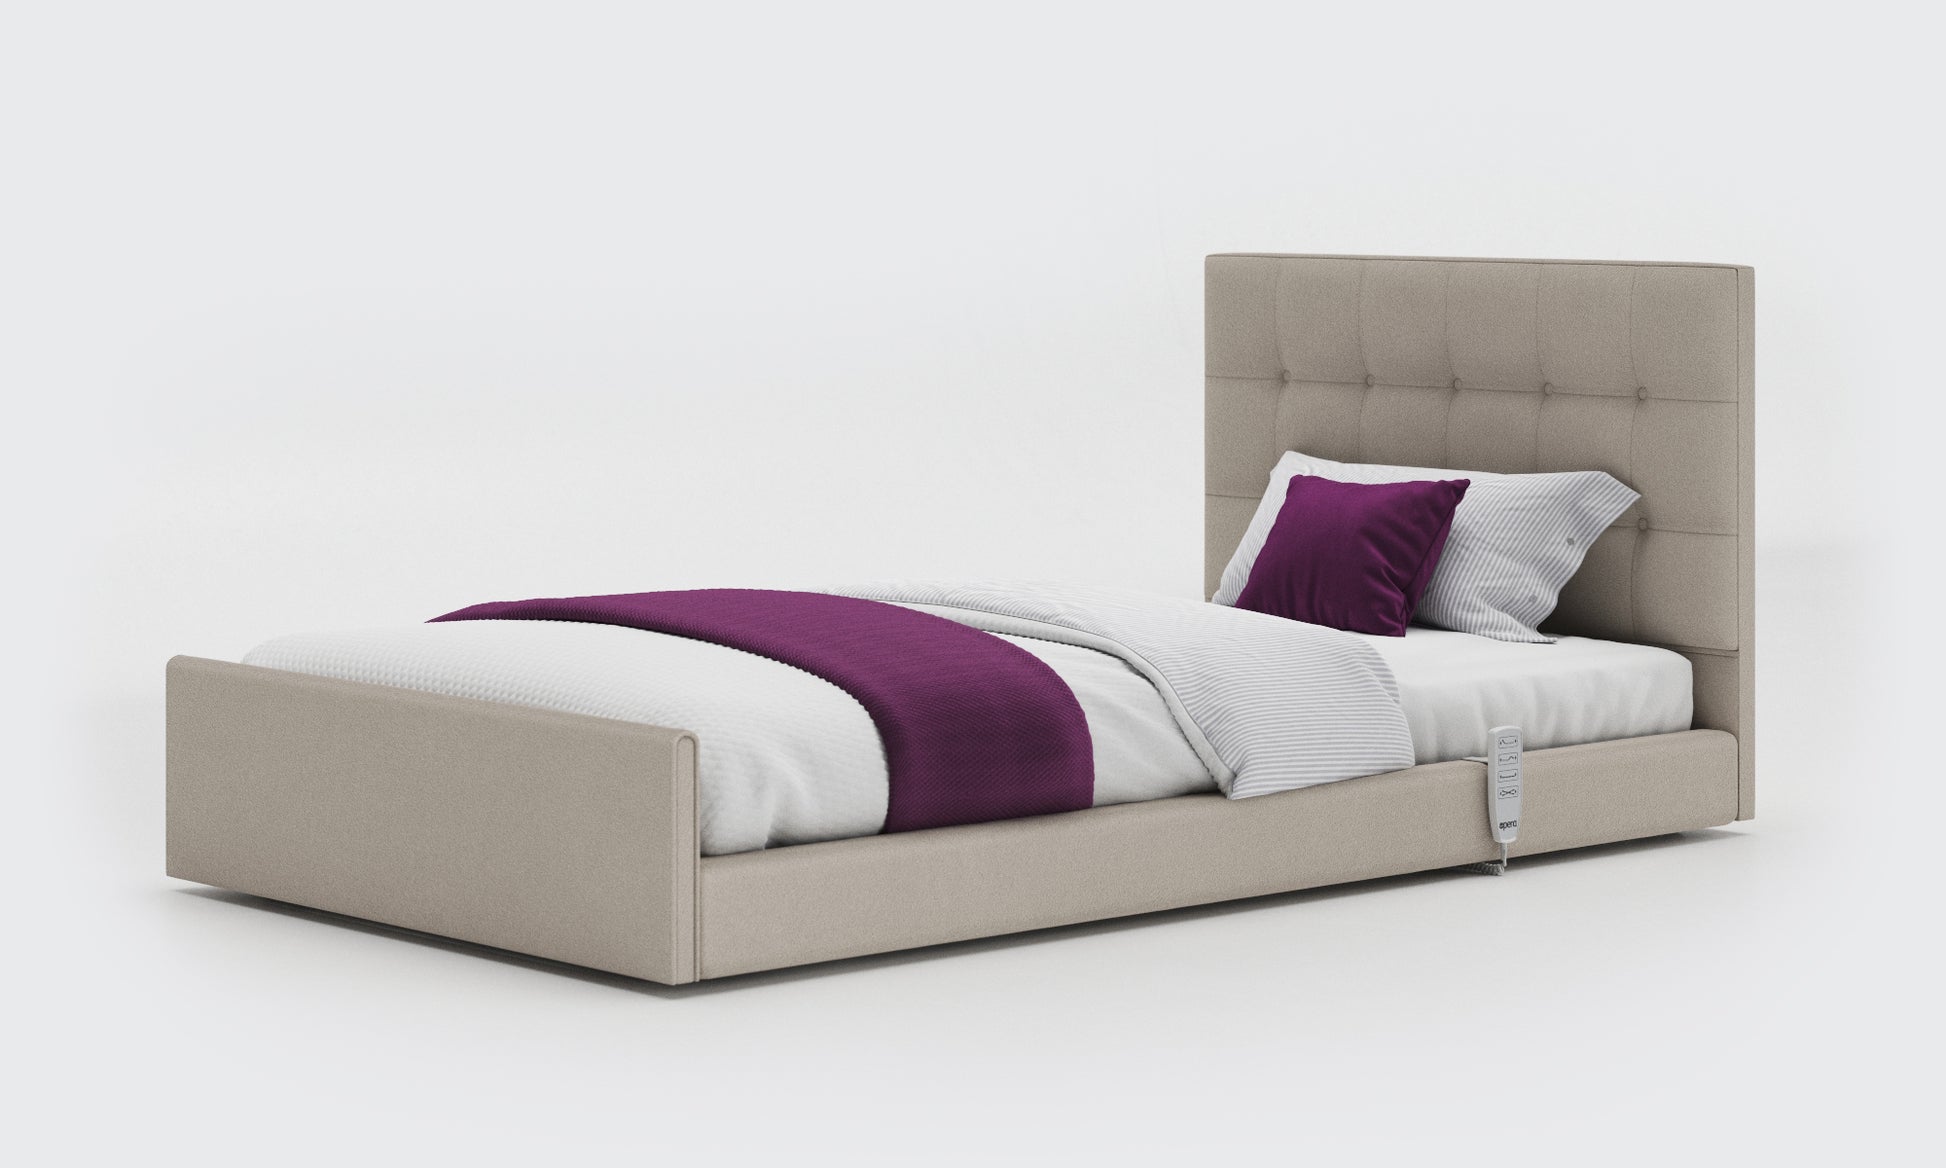 solo comfort bed 3ft6 with an emerald headboard in linen fabric